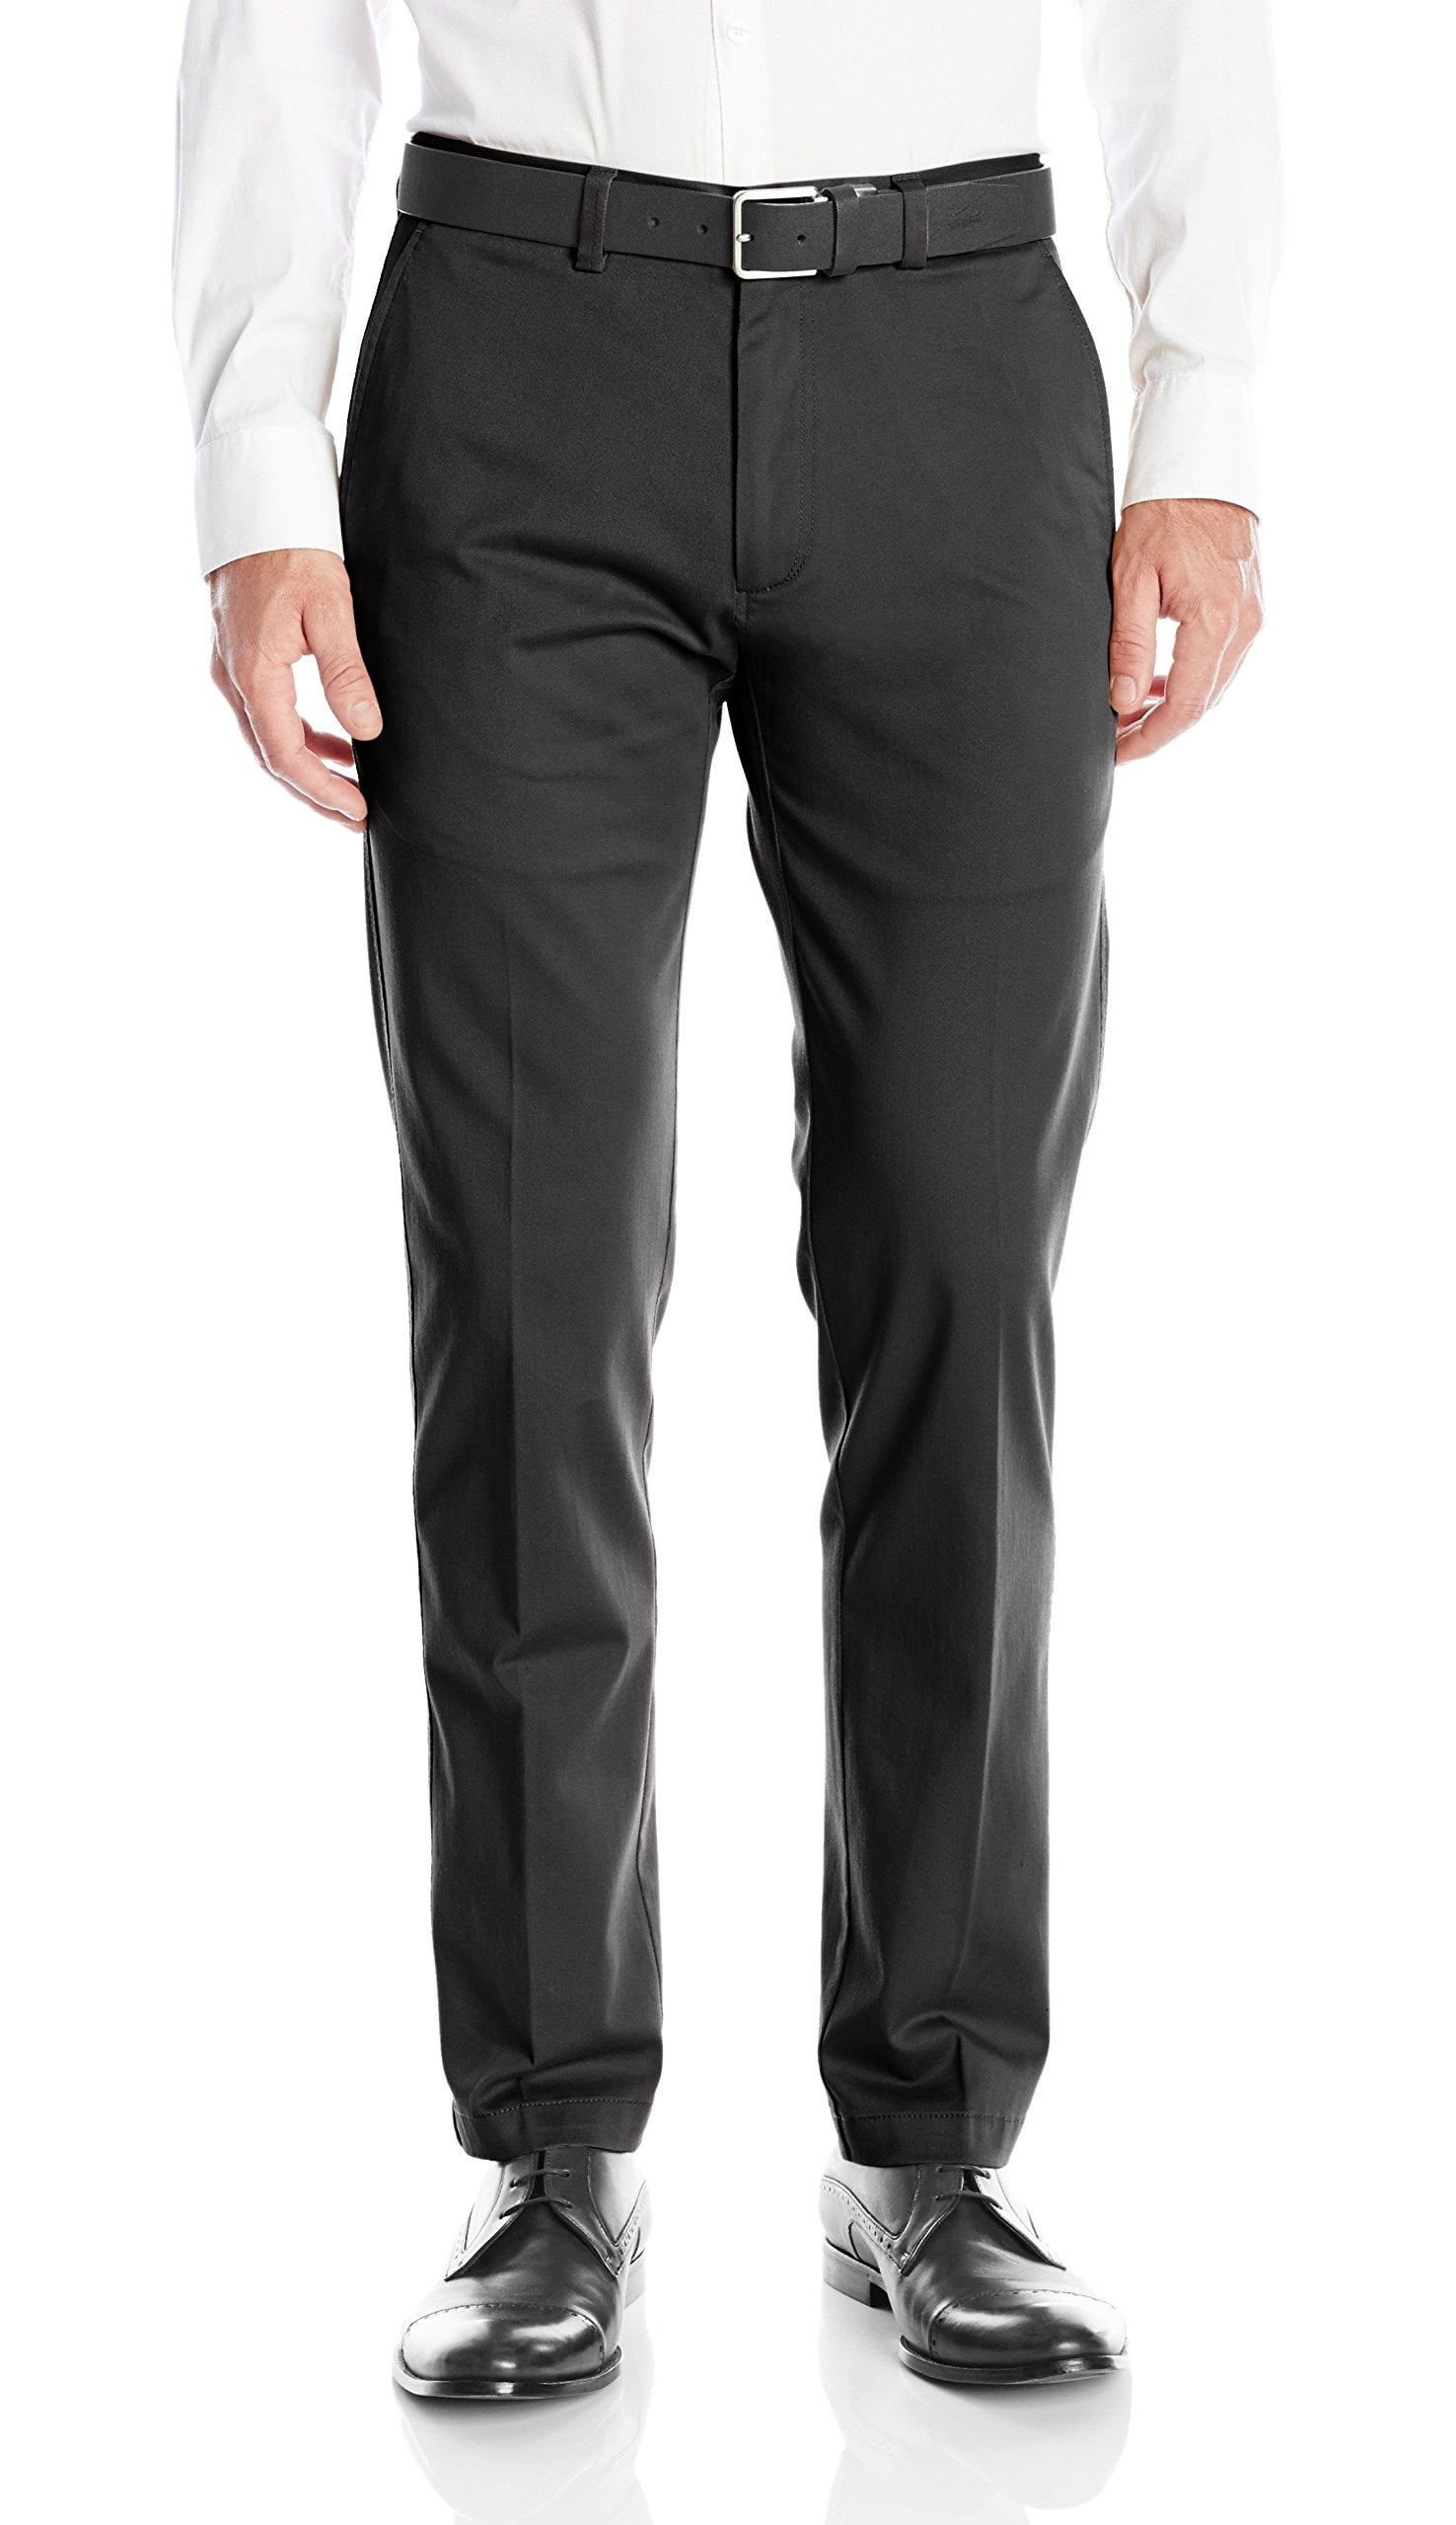 Kenneth Cole Reaction - Reaction Kenneth Cole NEW Black Mens Size 30x29 ...